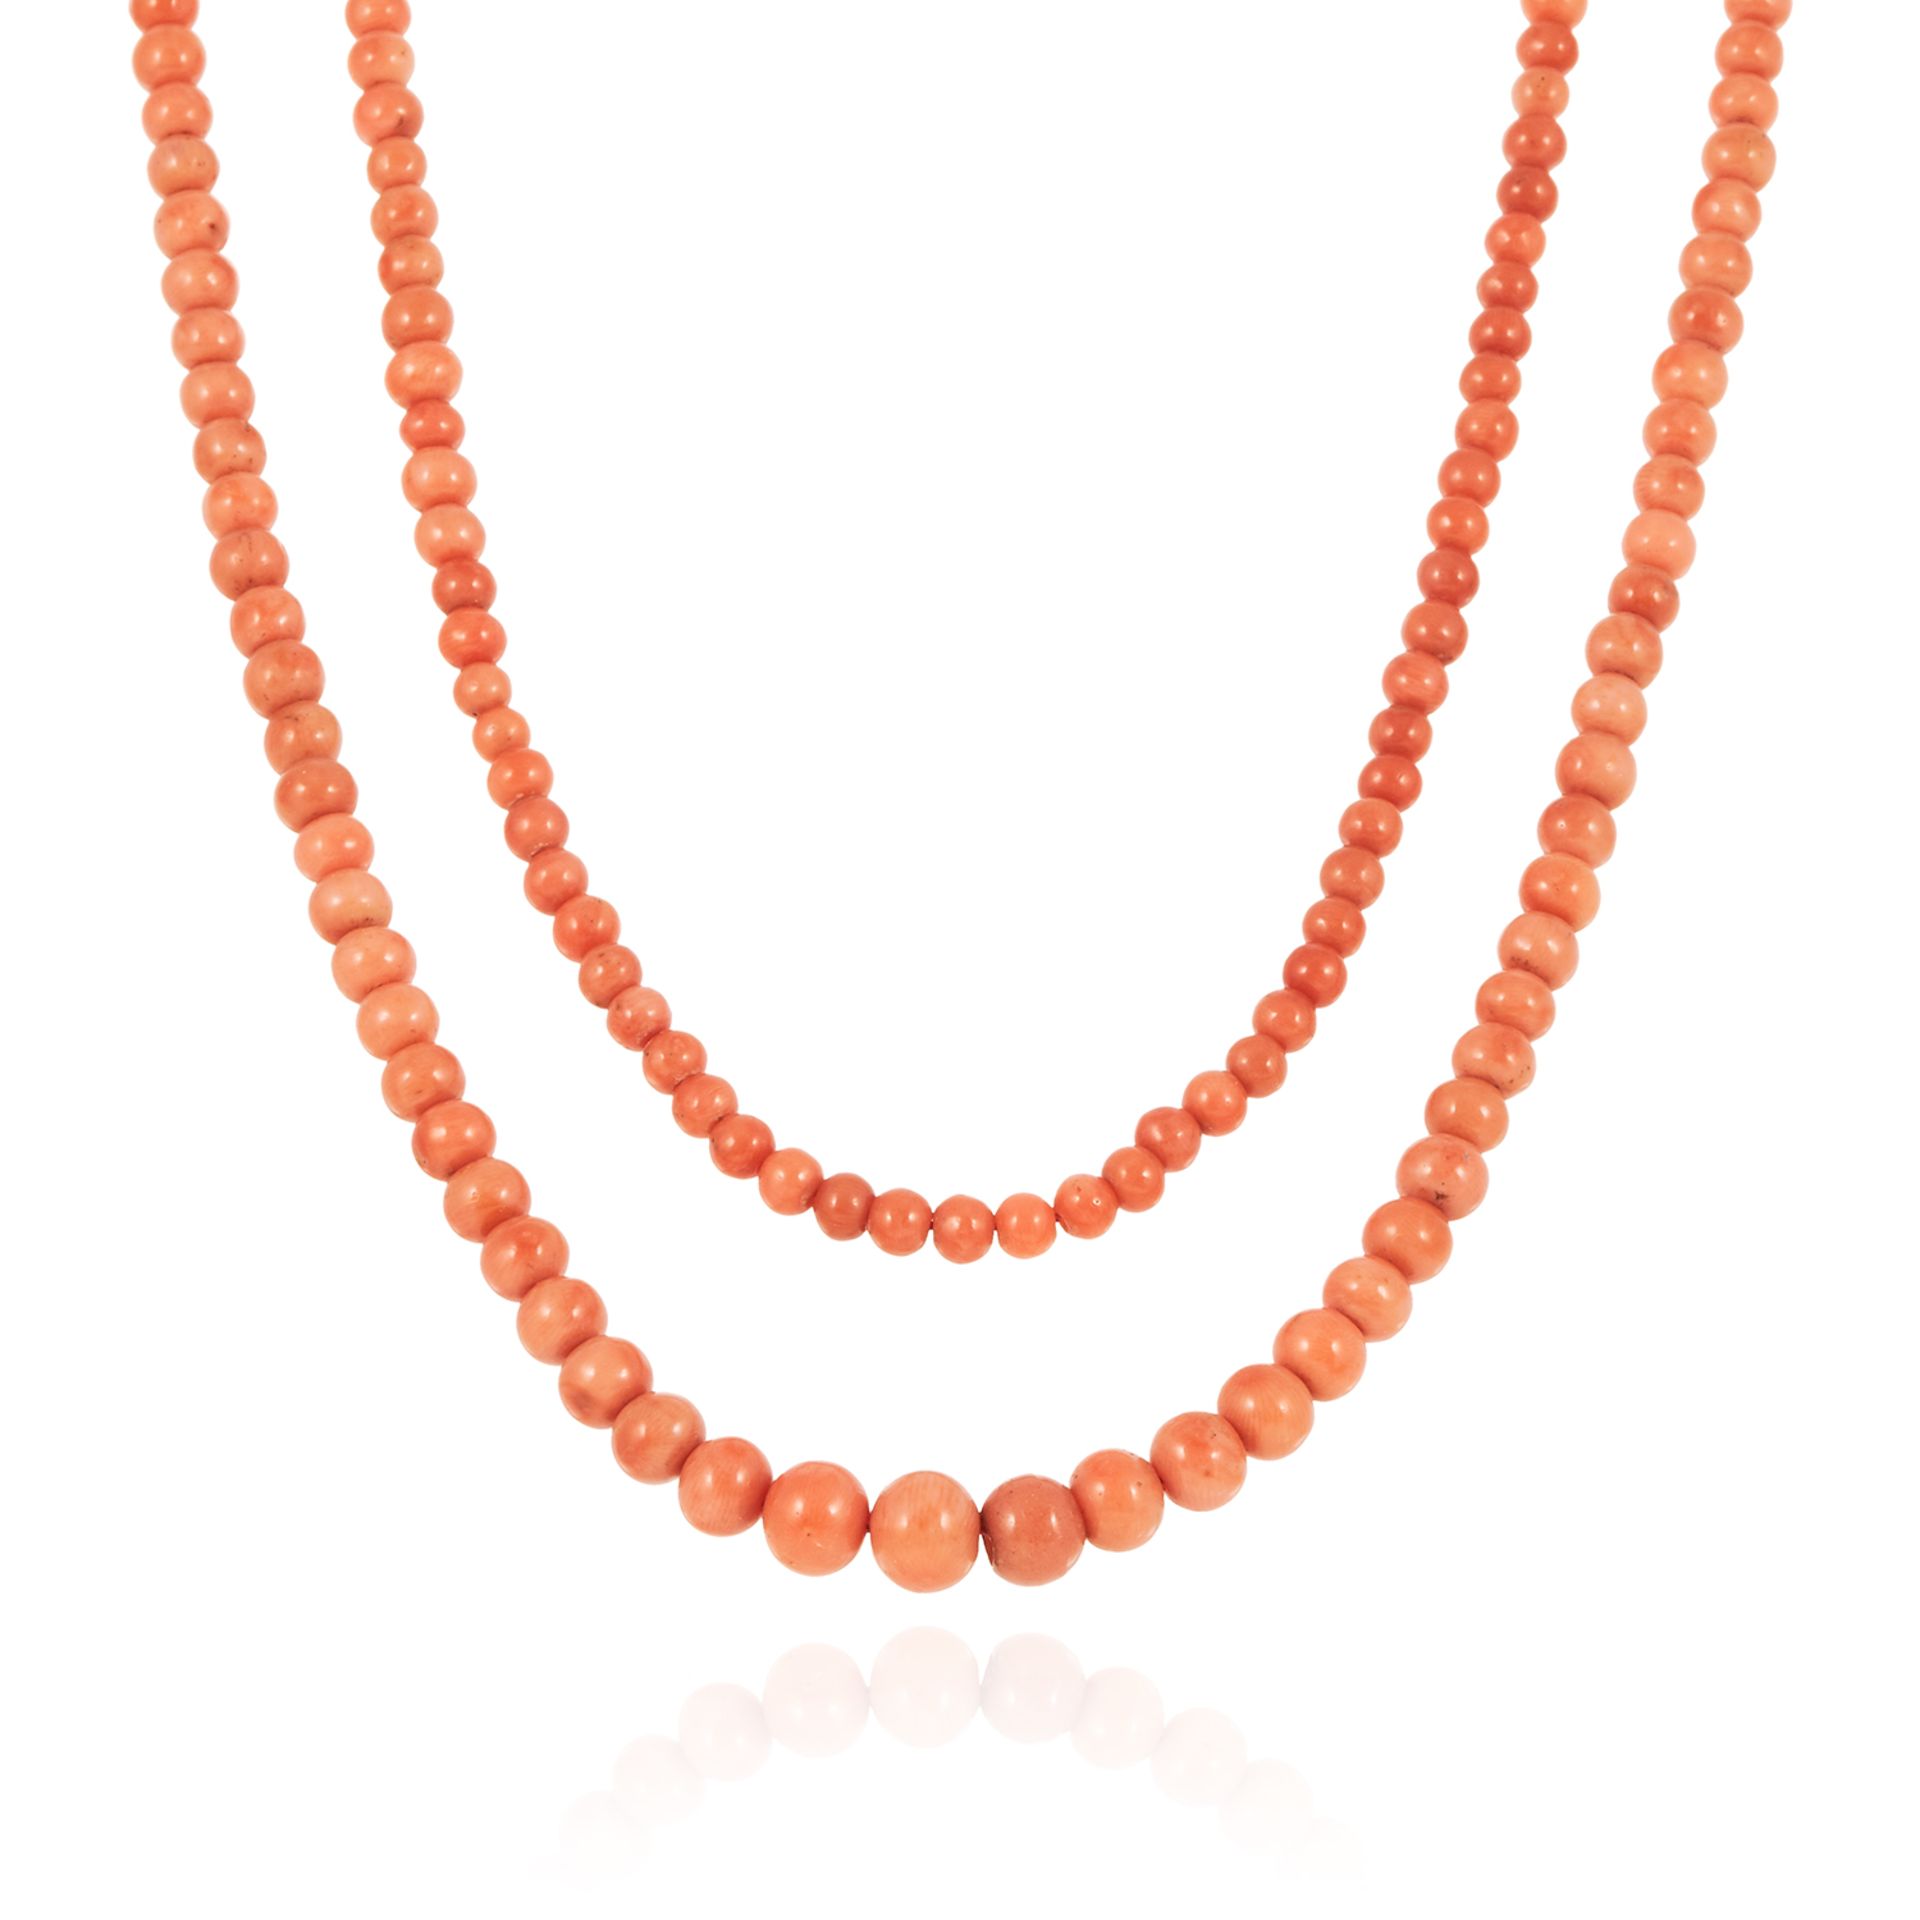 A LONG CORAL BEAD NECKLACE comprising a single row of three hundred and forty nine polished coral